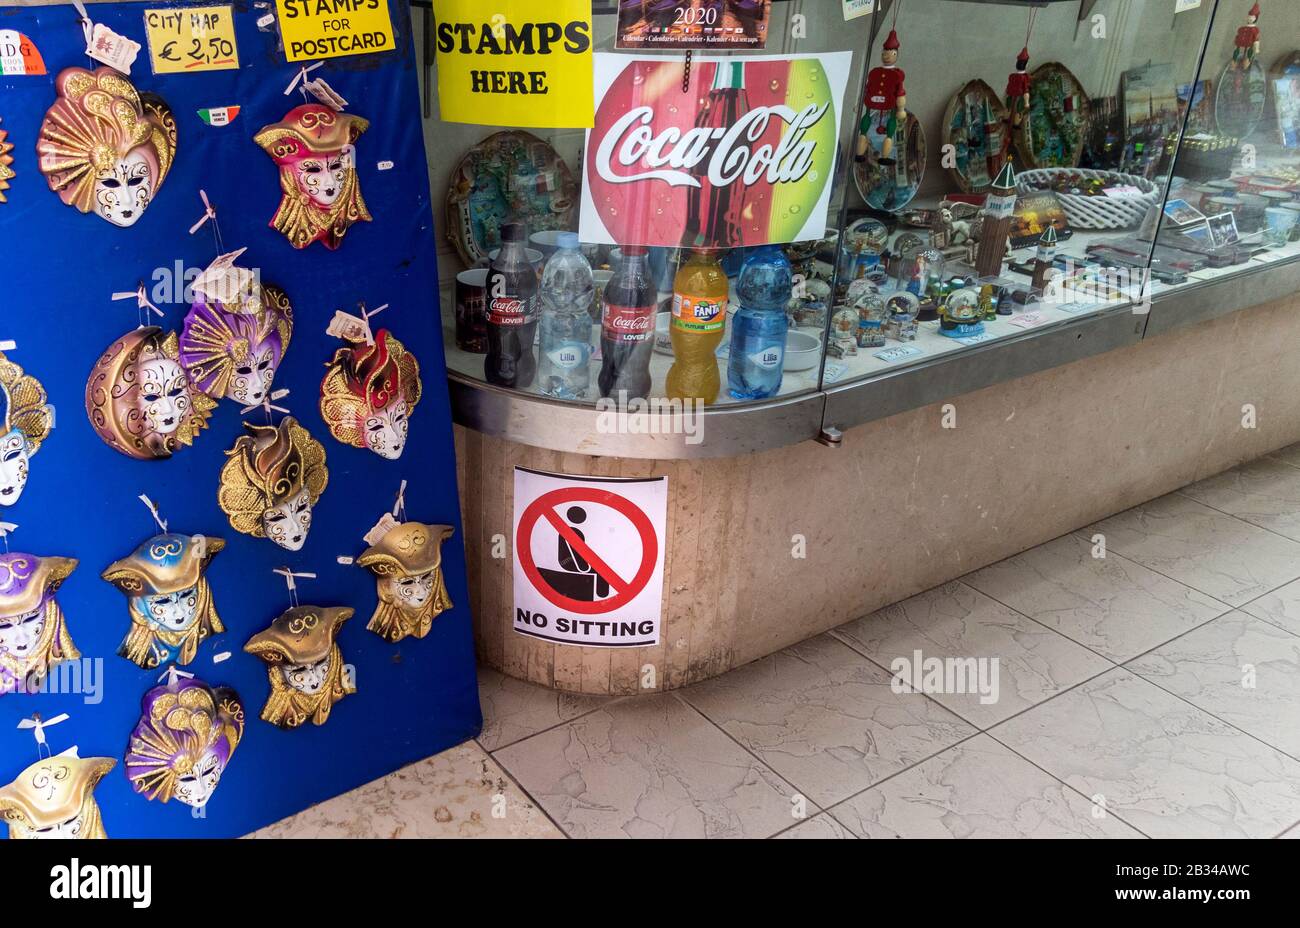 New laws in Venice Italy against tourists who behave badly. Fines will be issued, No sitting sign in front of shop window, Venice, Italy Stock Photo